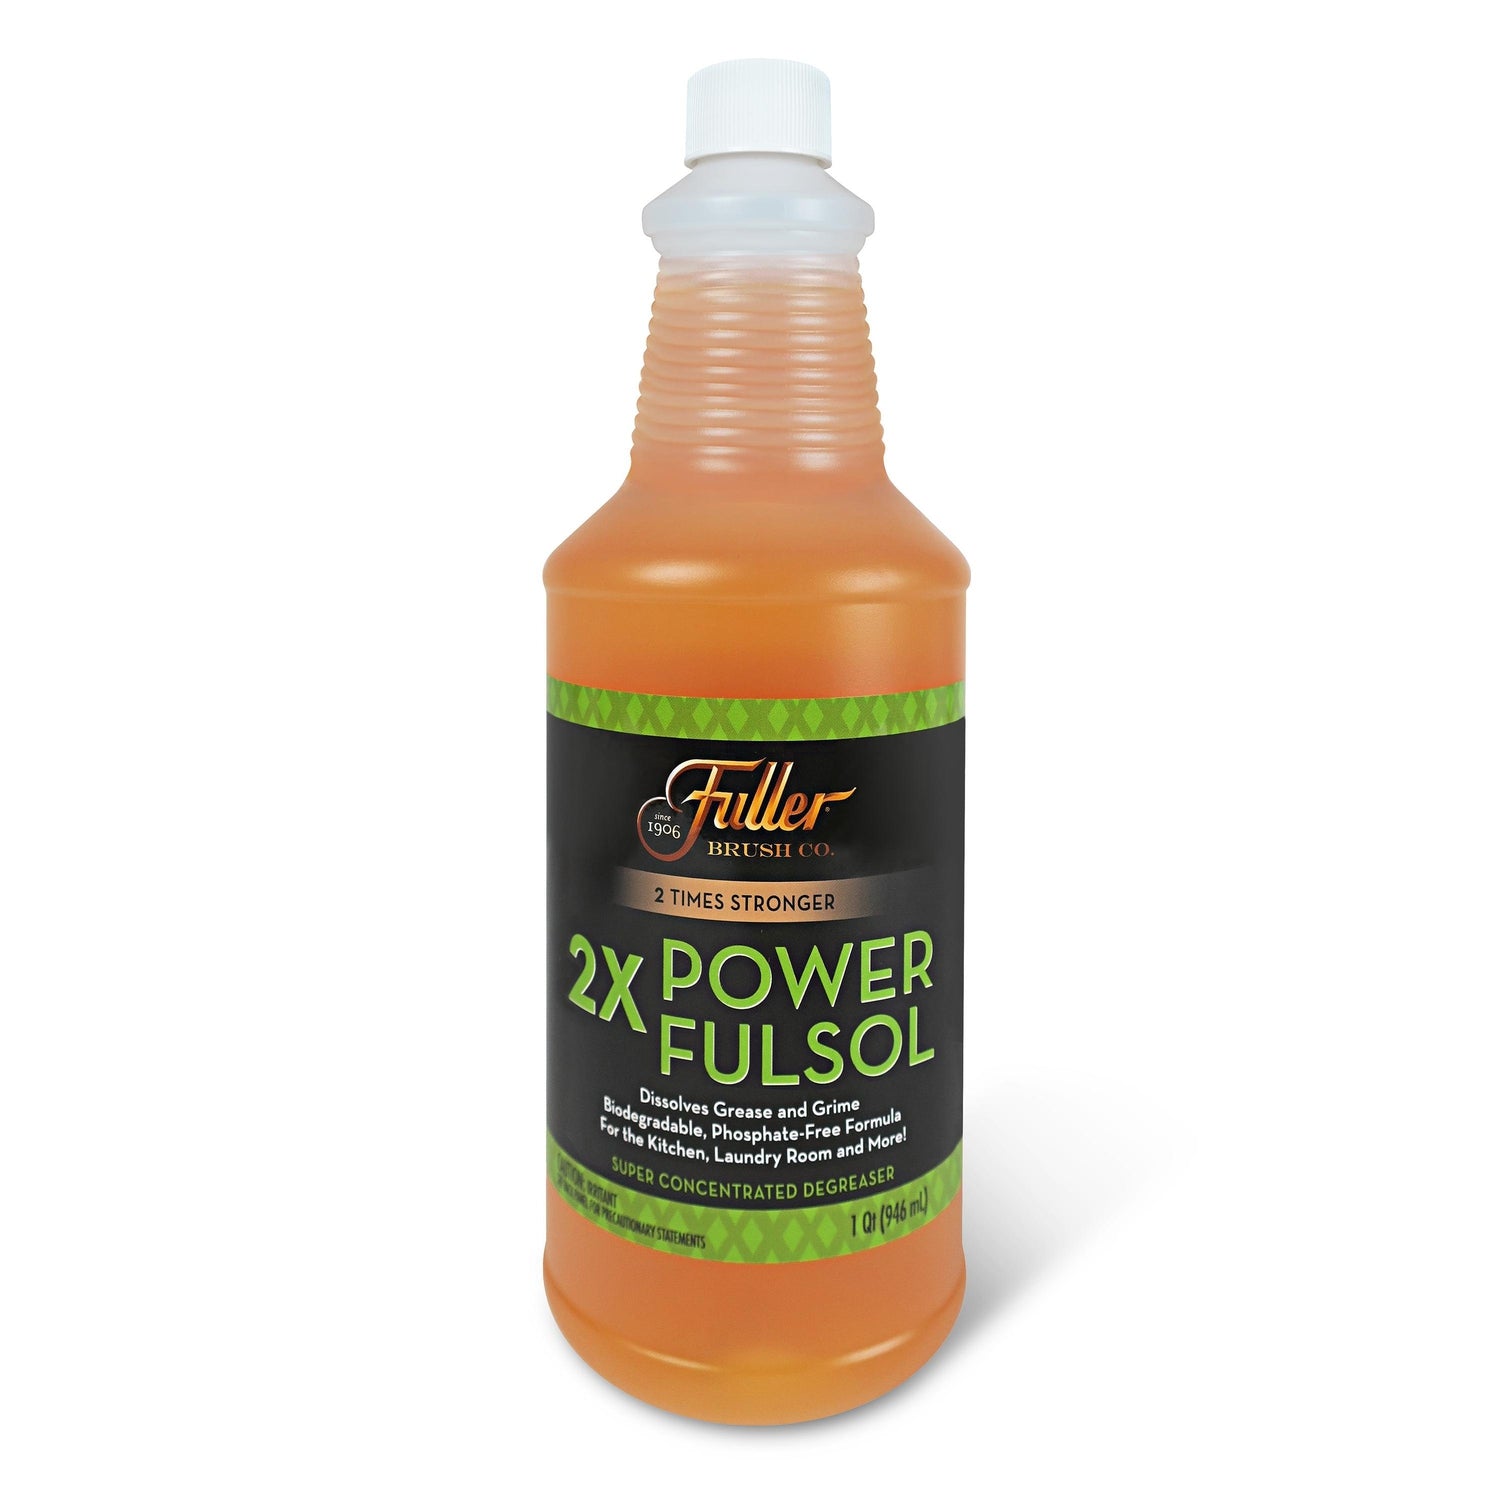 2X Power Fulsol Super Concentrated Degreaser – Dissolves Grease & Grime-Degreasers-Fuller Brush Company